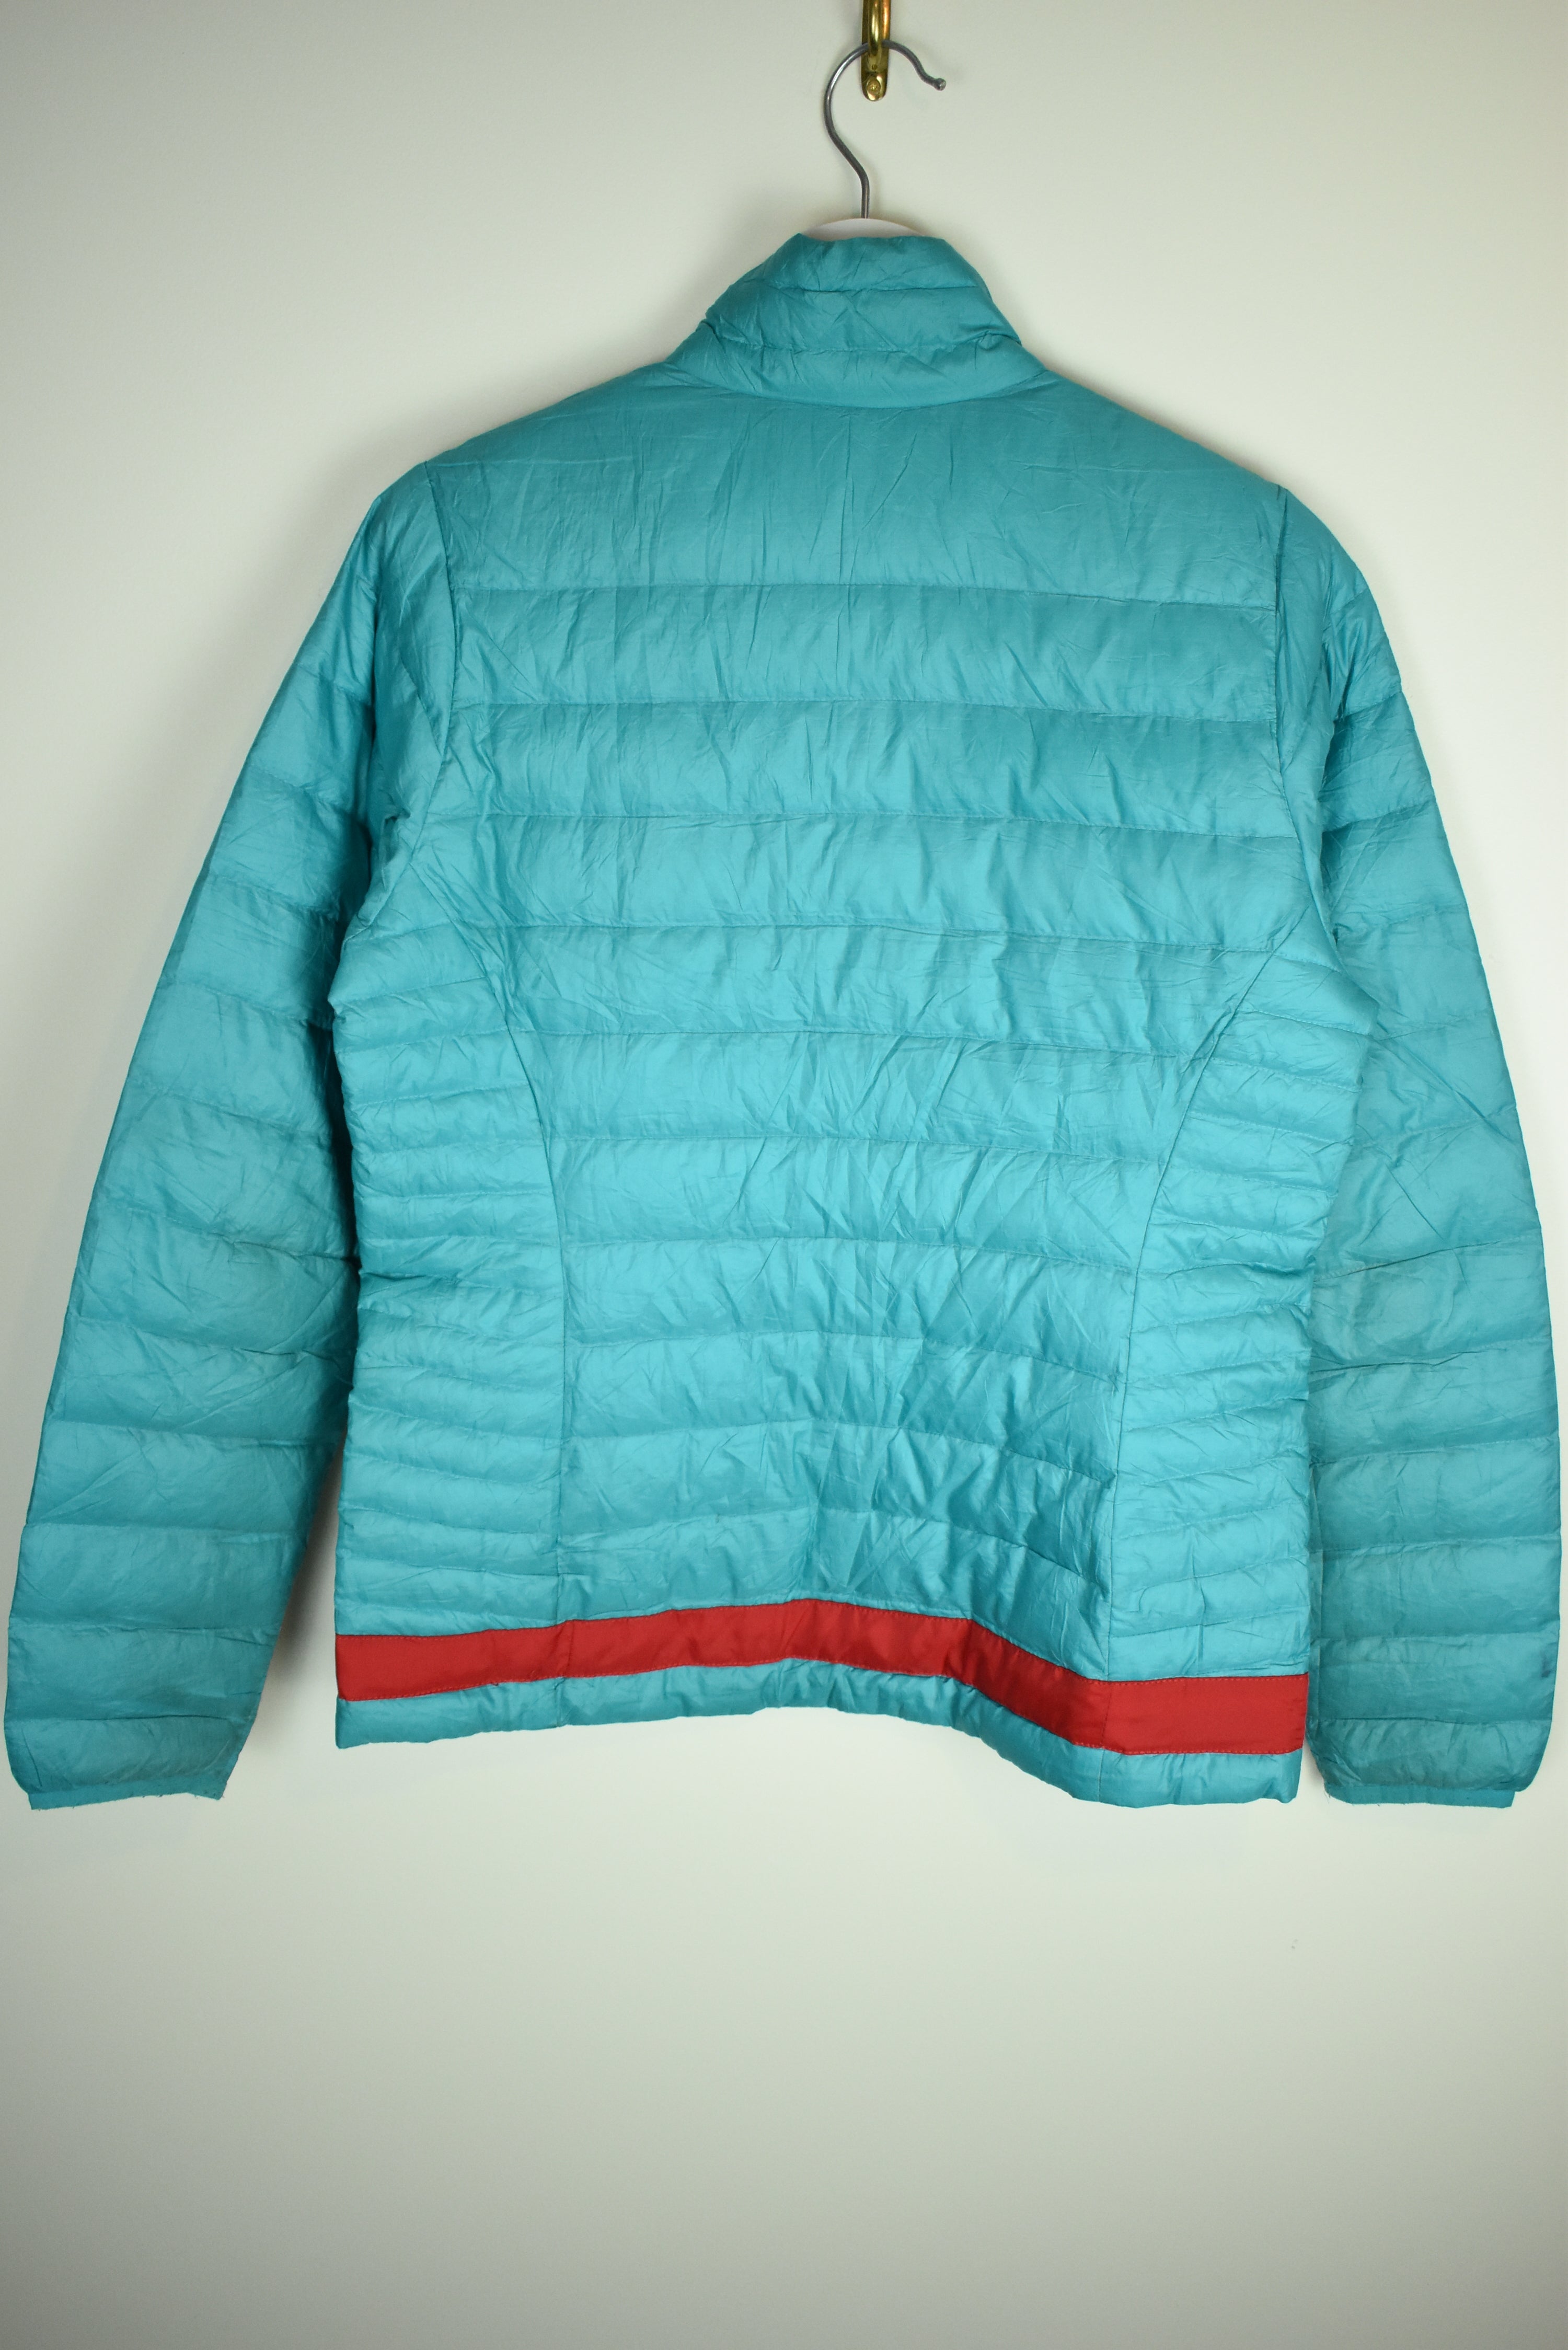 Vintage Patagonia Turquoise Puffer Jacket Small | Vintage Clothing